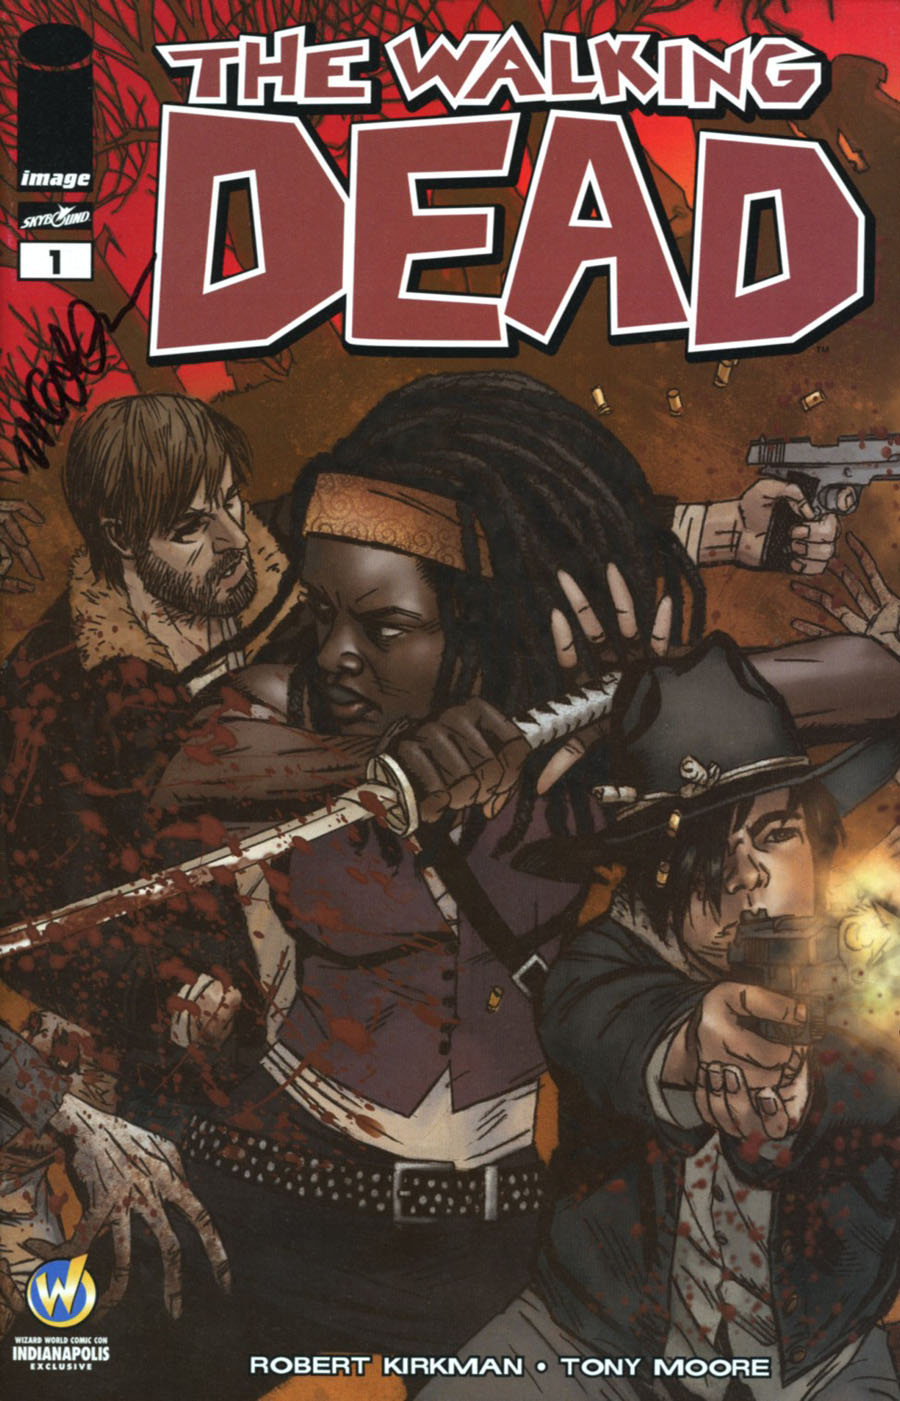 Walking Dead #1 Cover V Wizard World Comic Con Indianapolis Exclusive Michael Golden Color Variant Cover Signed By Michael Golden